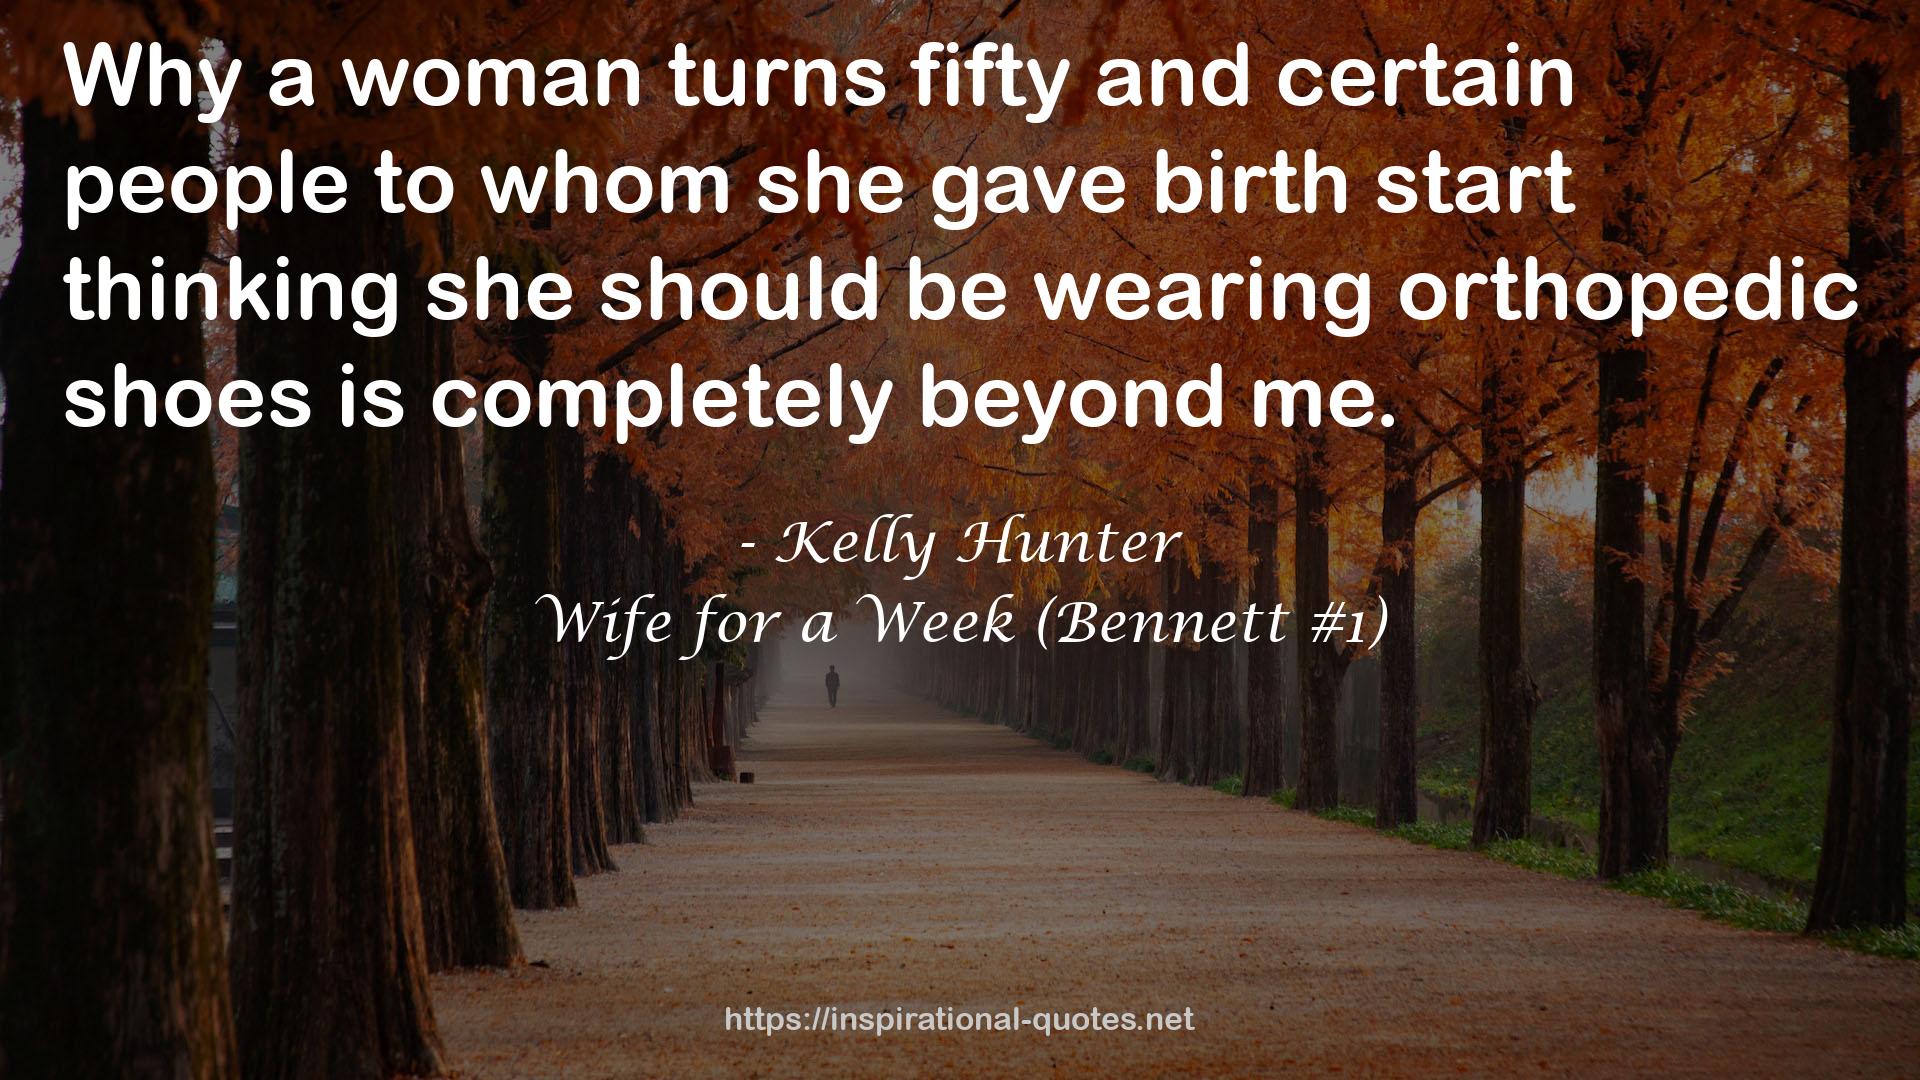 Wife for a Week (Bennett #1) QUOTES